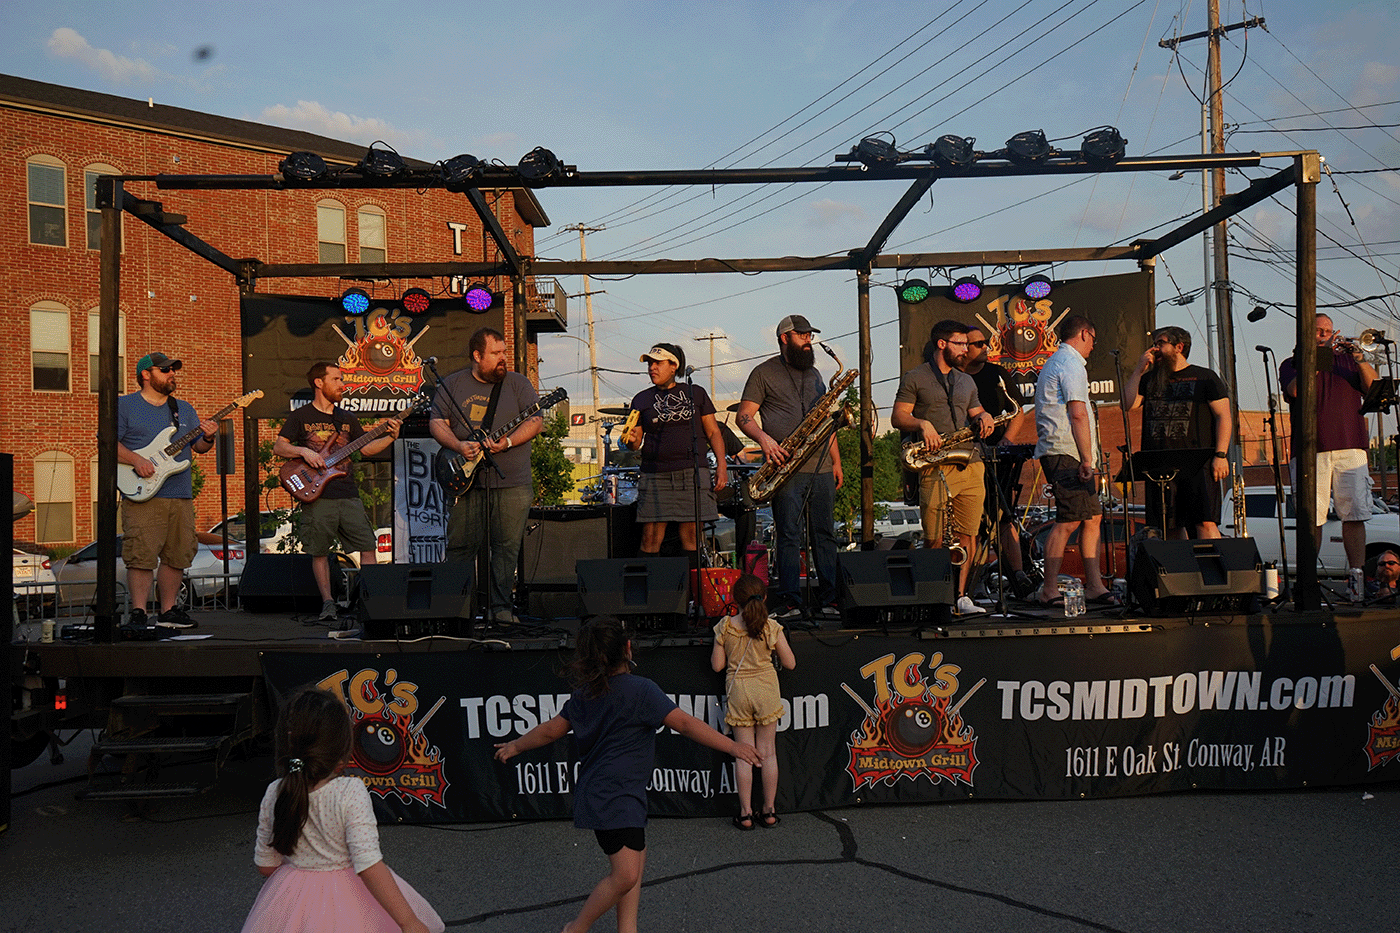 Musicians on stage at sunset in Argenta